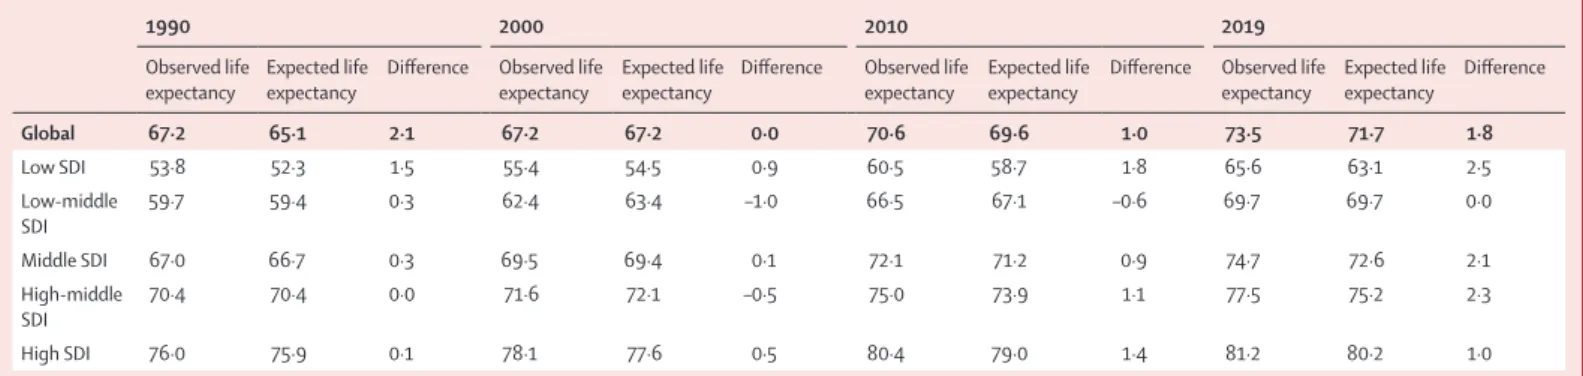 Table 3: Observed and expected life expectancy, globally and by SDI quintile, for 1990, 2000, 2010, and 2019